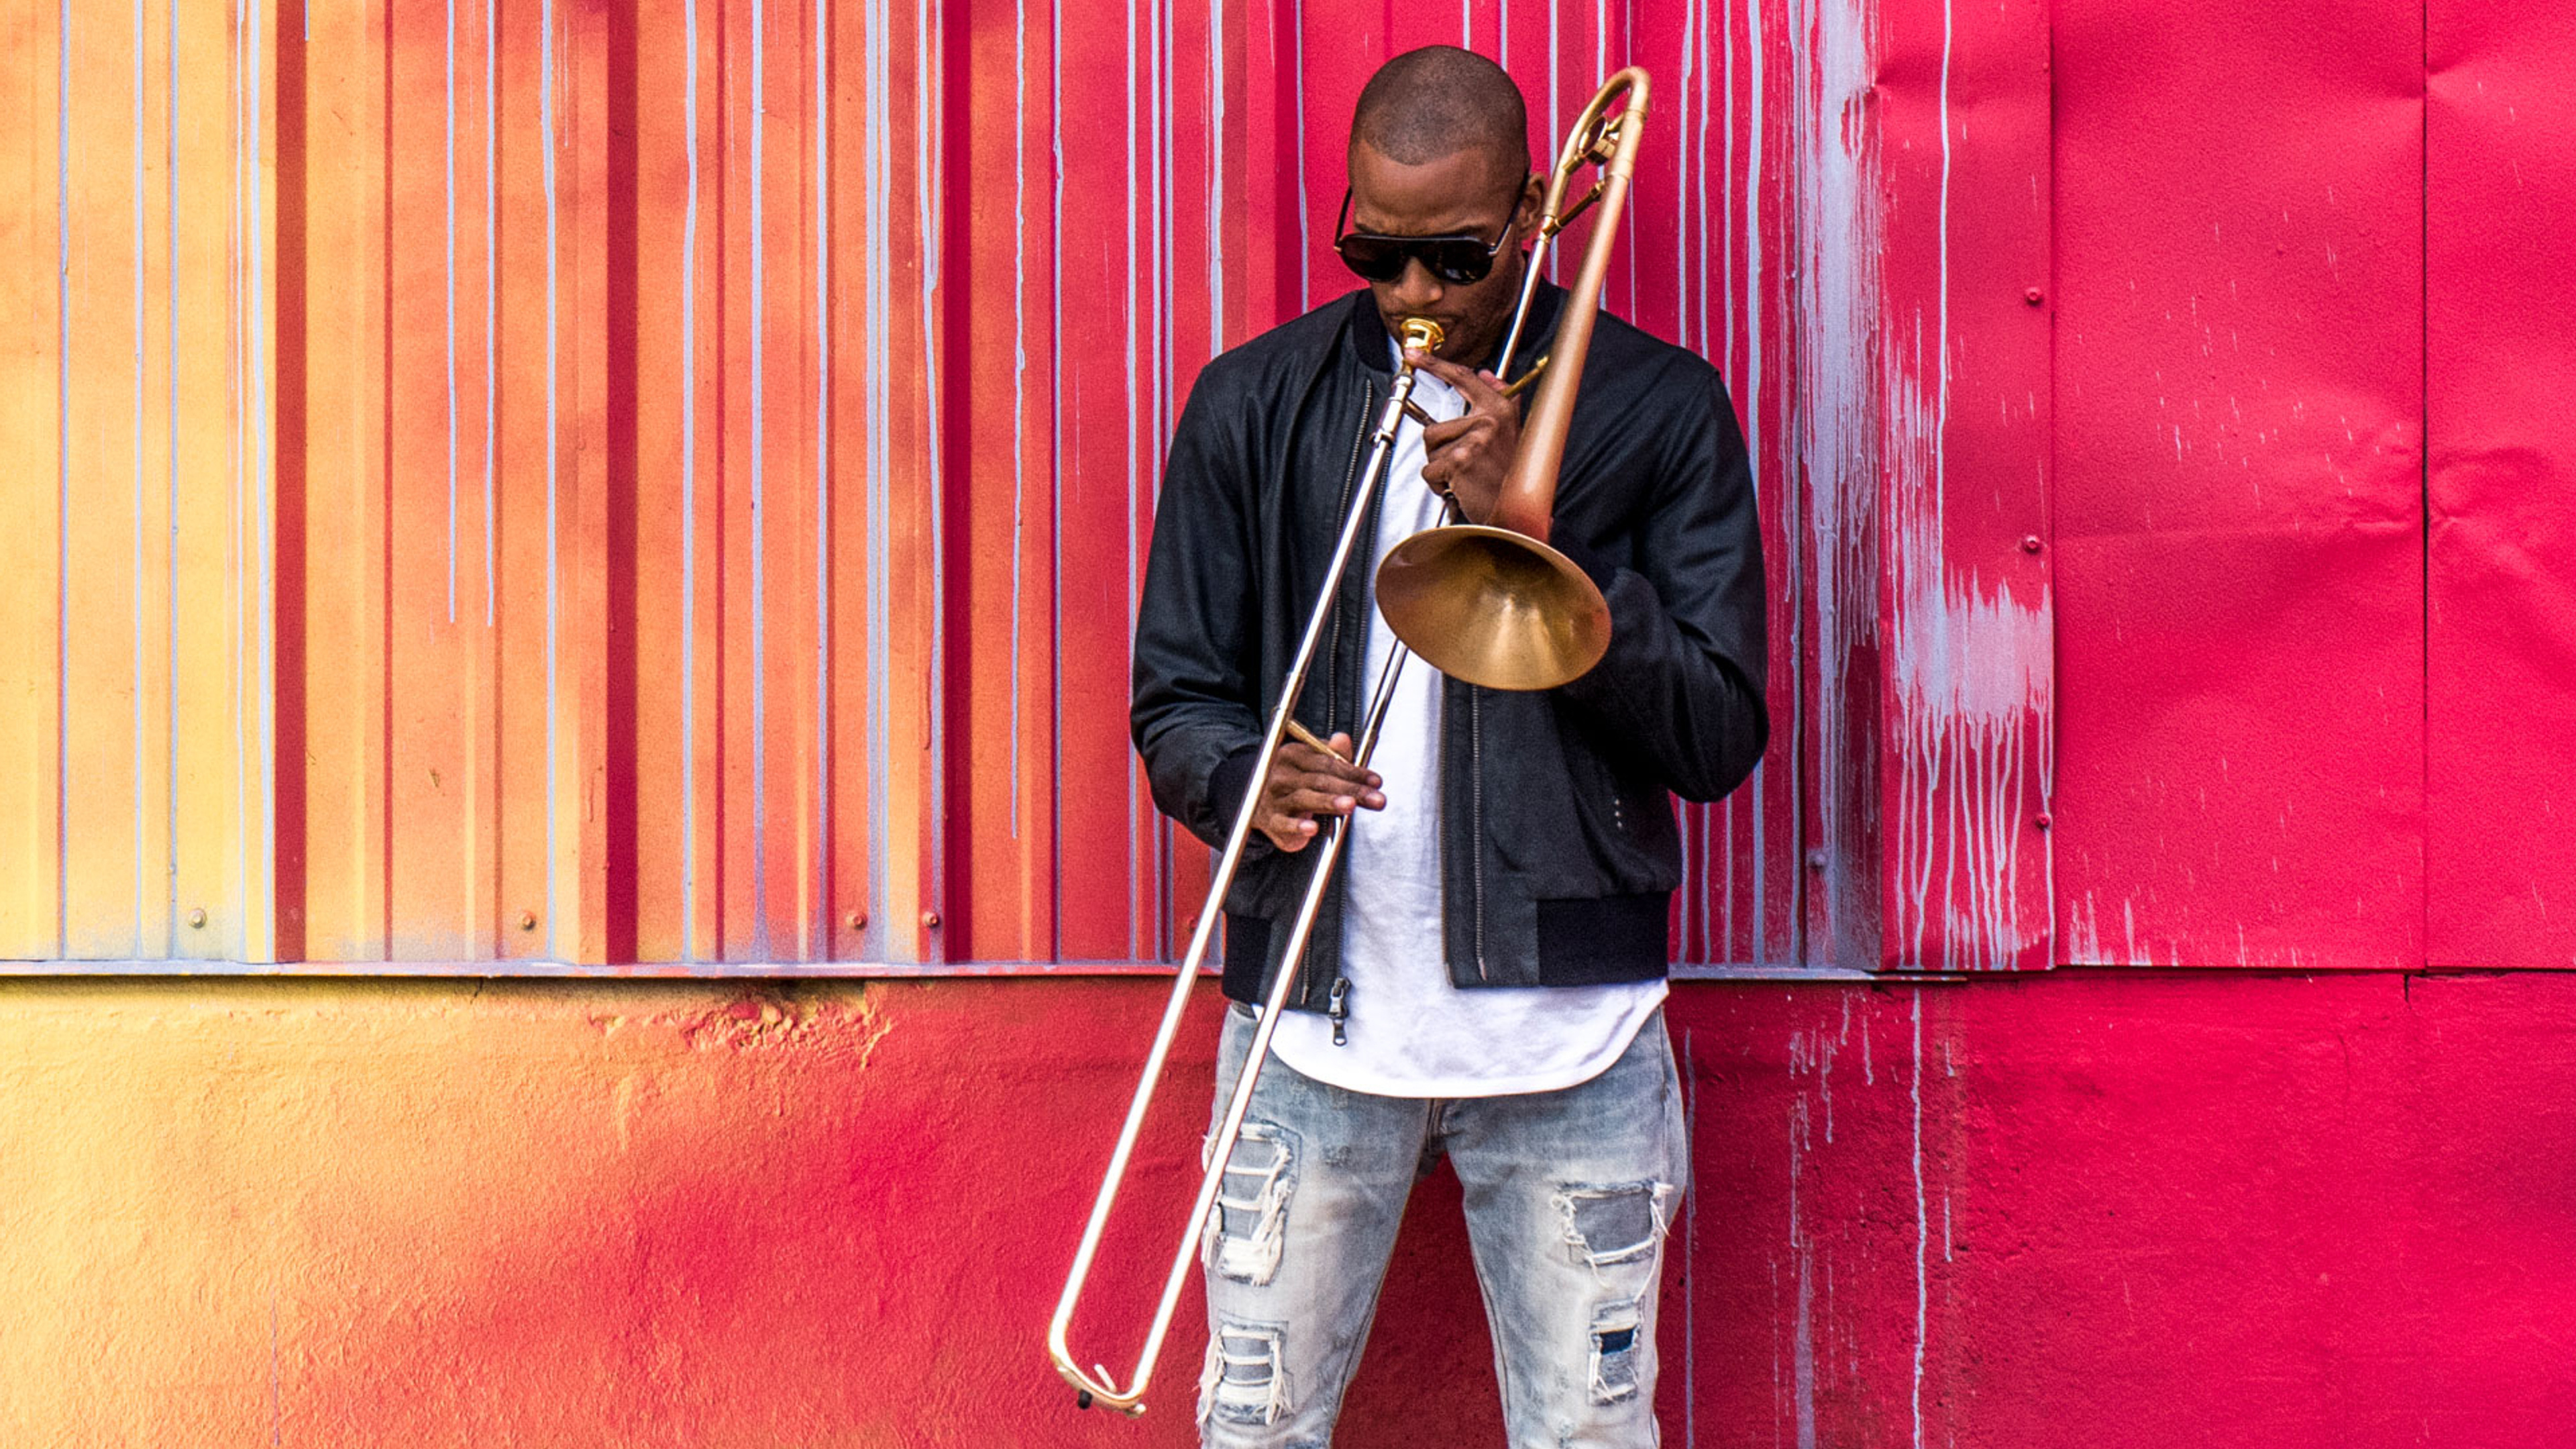 Trombone: Trombone Shorty, Artist, Troy Andrews, A large musical instrument of the brass family. 3840x2160 4K Background.